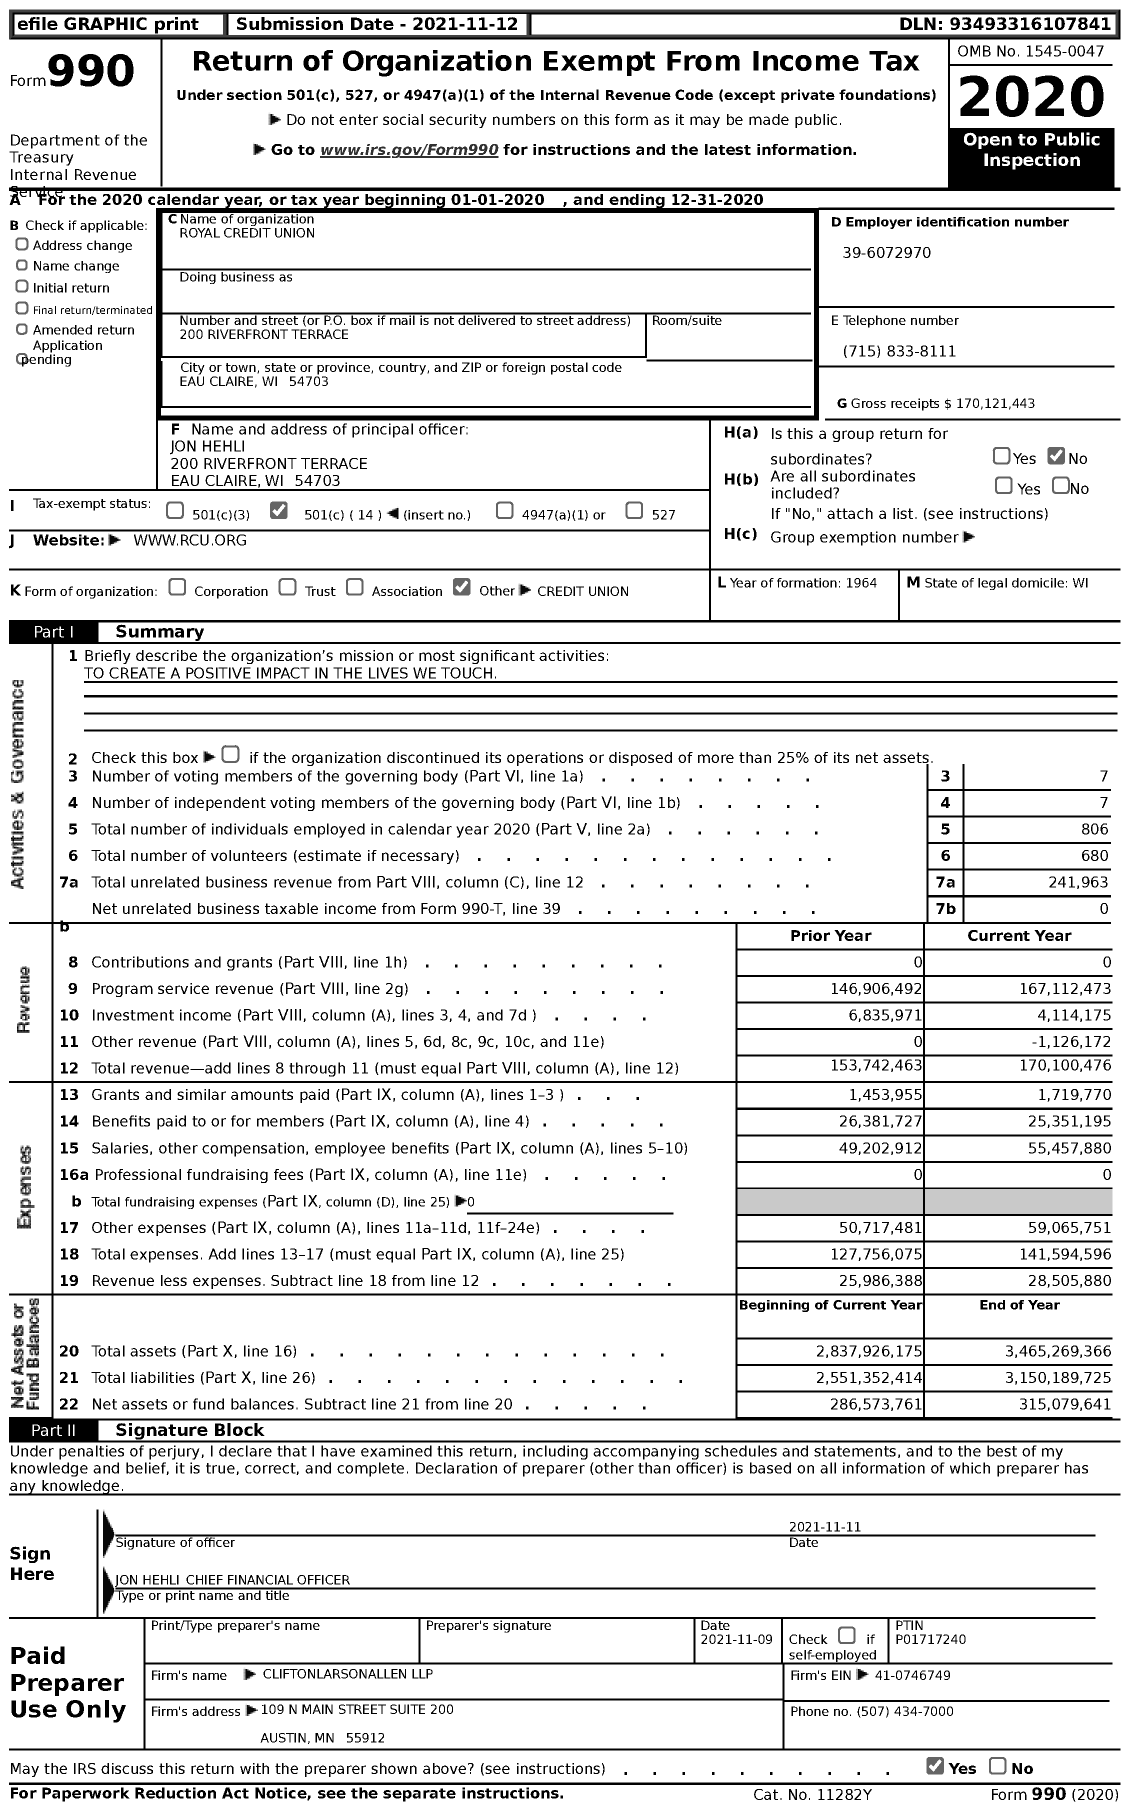 Image of first page of 2020 Form 990 for Royal Credit Union (RCU)